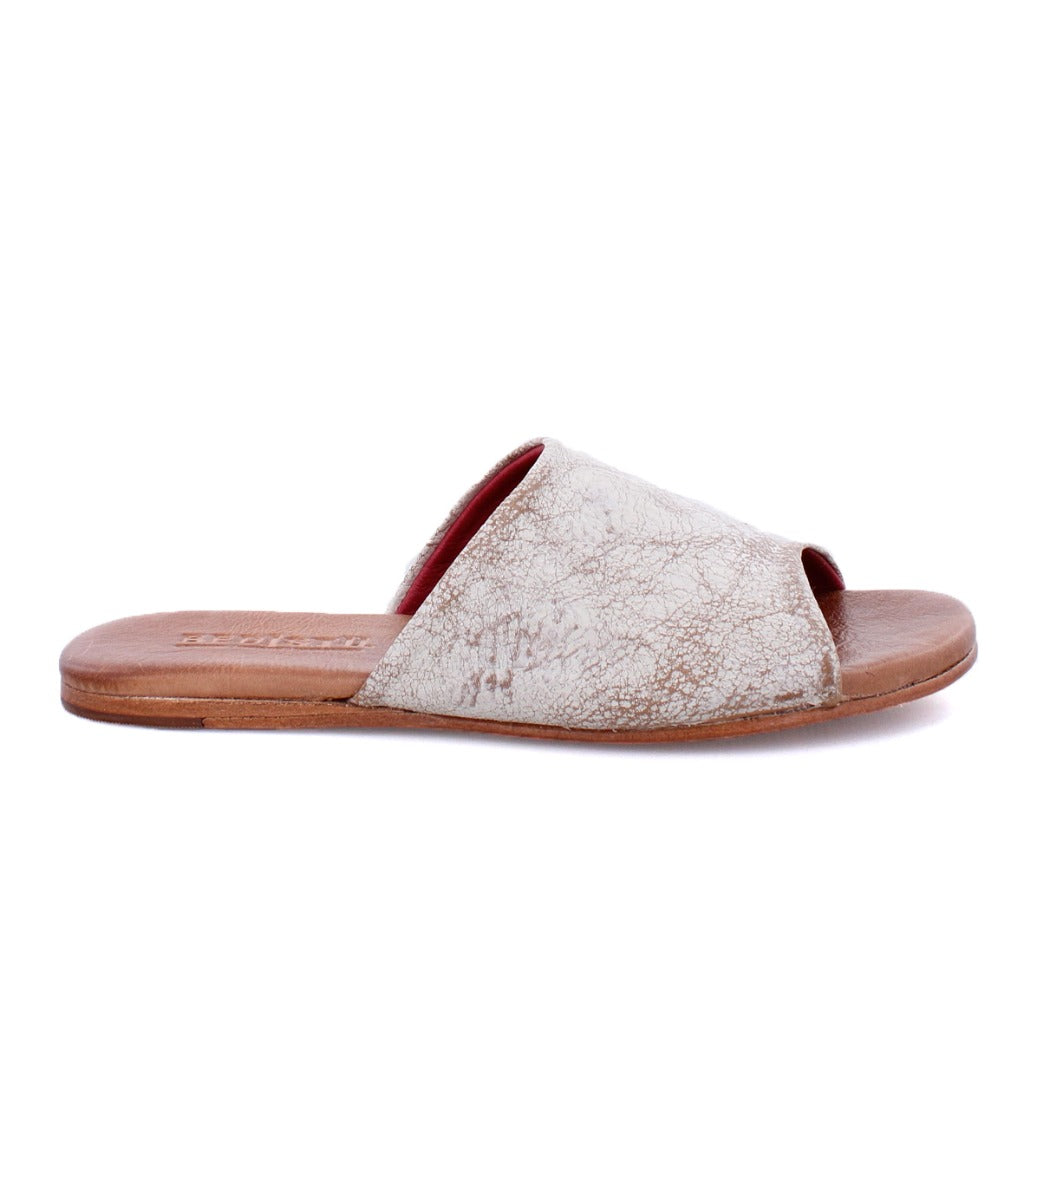 The Gia women's white leather slide on sandals by Bed Stu.